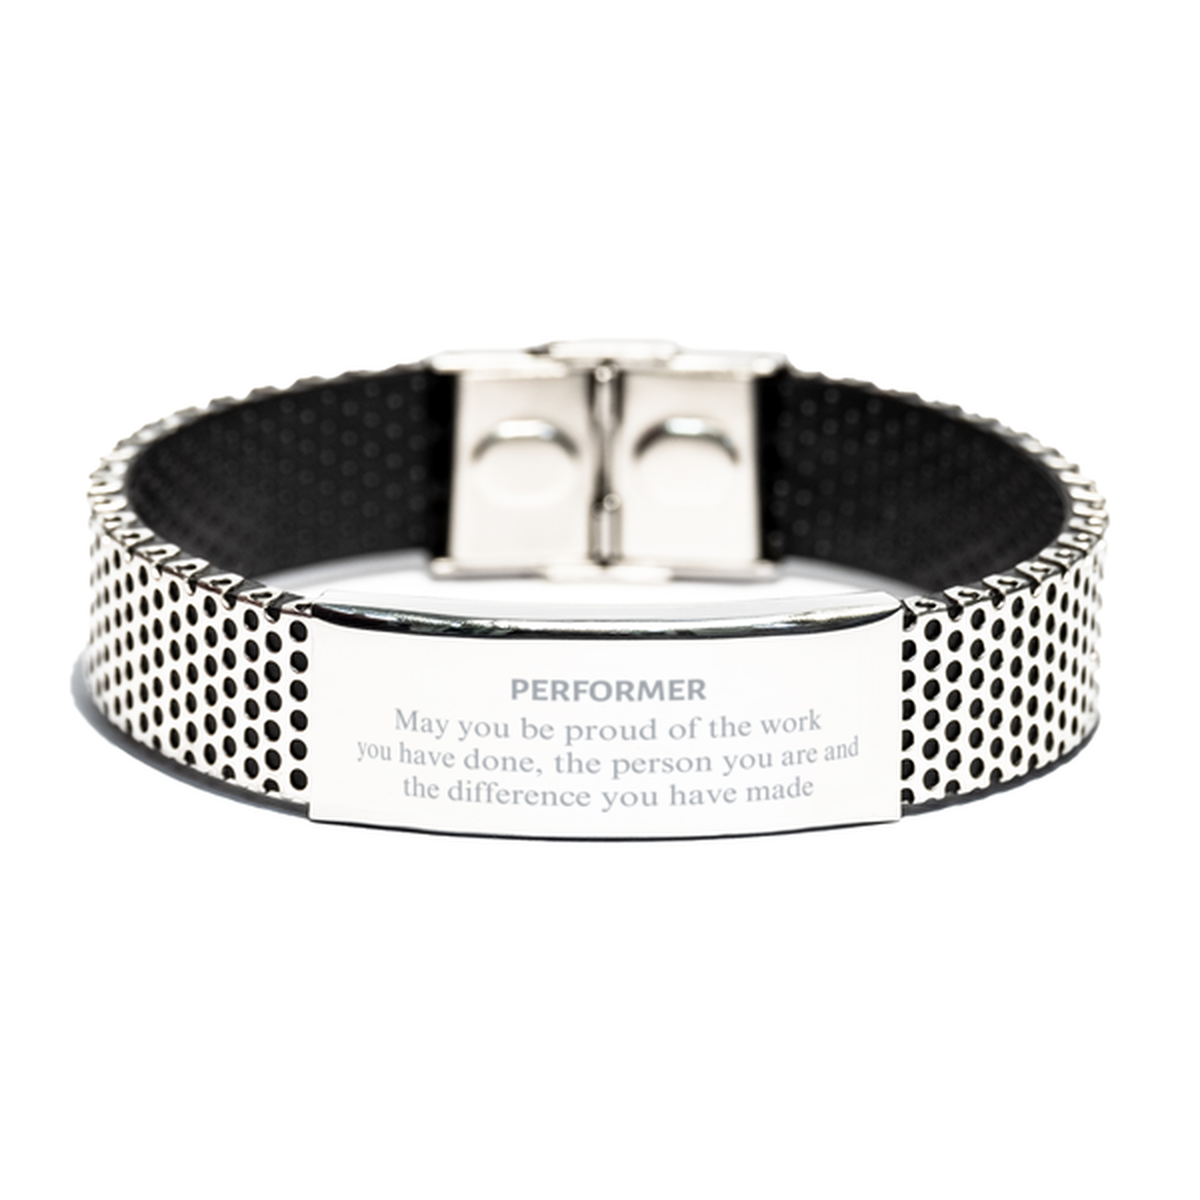 Performer May you be proud of the work you have done, Retirement Performer Stainless Steel Bracelet for Colleague Appreciation Gifts Amazing for Performer